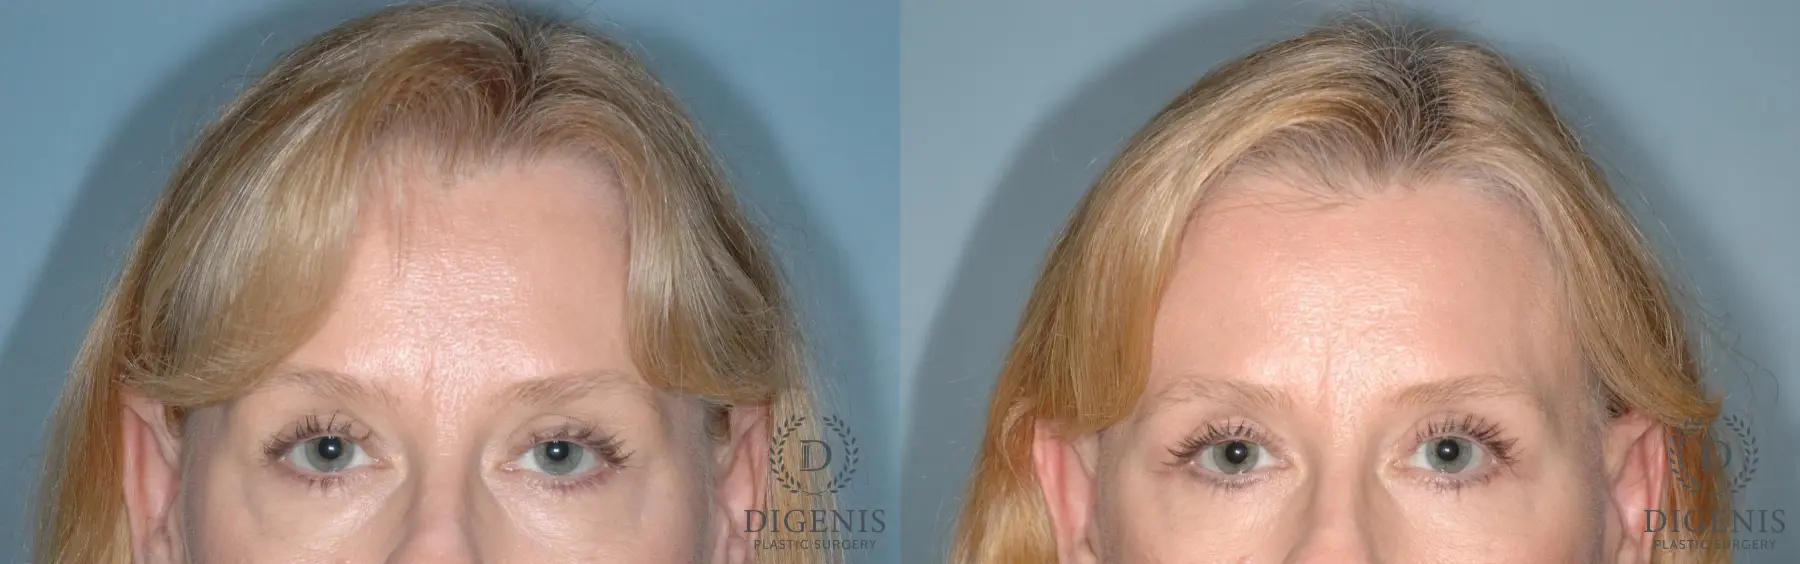 Eyelid Surgery: Patient 8 - Before and After 1